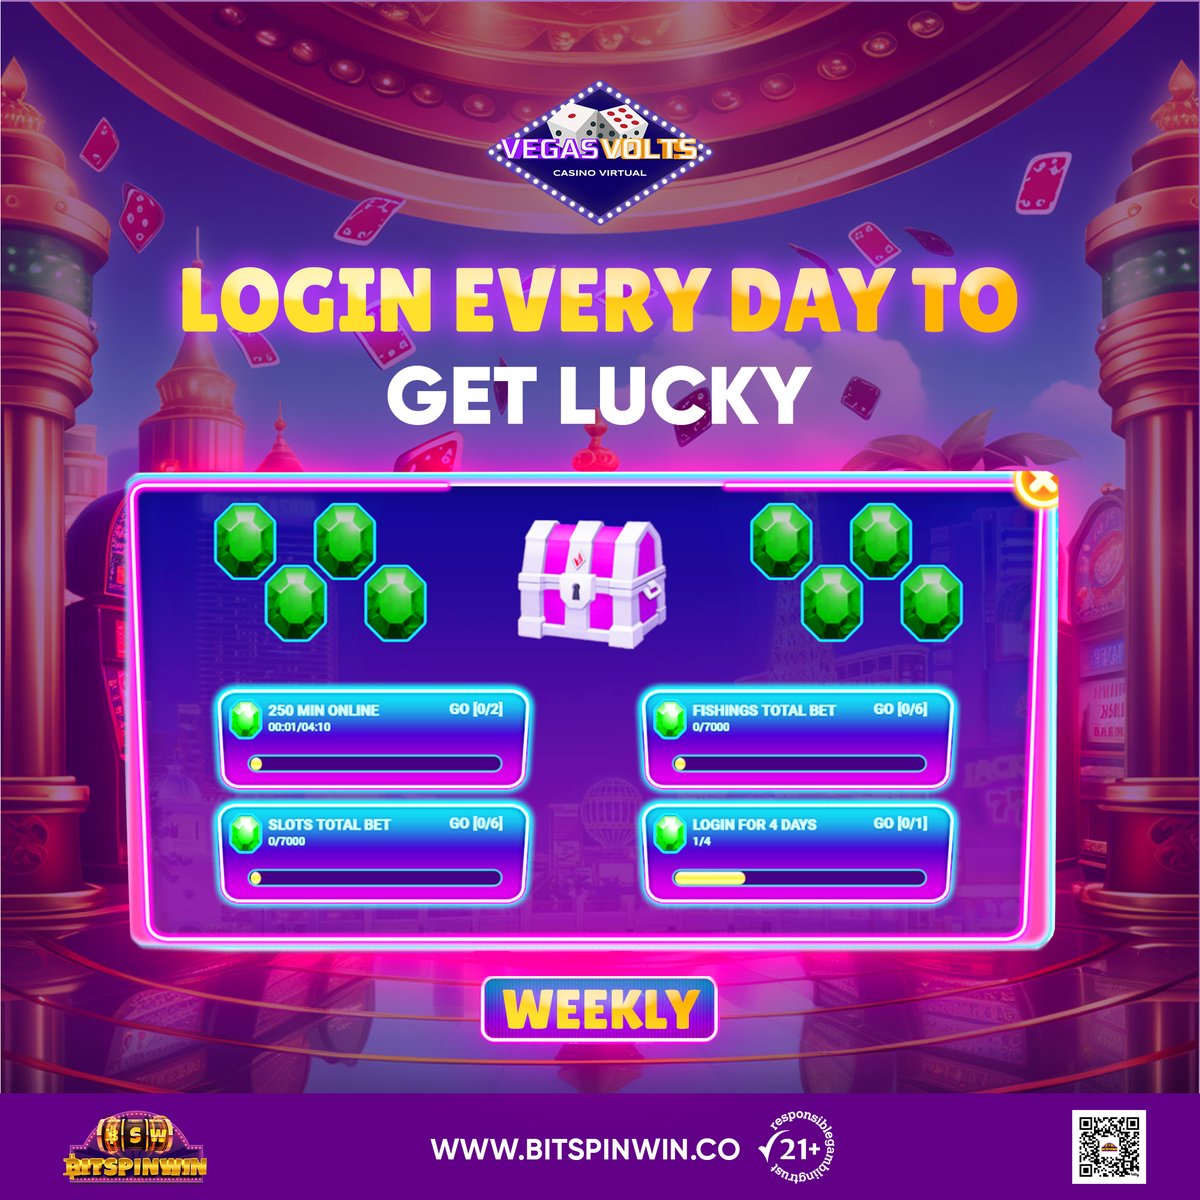 🎰𝐕𝐞𝐠𝐚𝐬 𝐕𝐨𝐥𝐭𝐬: 𝐖𝐡𝐞𝐫𝐞 𝐃𝐚𝐢𝐥𝐲 𝐋𝐨𝐠𝐢𝐧𝐬 𝐋𝐞𝐚𝐝 𝐭𝐨 𝐖𝐞𝐞𝐤𝐥𝐲 𝐖𝐢𝐧𝐬! Sign Up today & Claim your daily dose of luck! 𝐂𝐋𝐈𝐂𝐊 𝐇𝐄𝐑𝐄: t.ly/vegasvolts_tw . #normani #bakersfield #klay #revolutionarywar #slotgames #casinobonus #onlinecasino #USA